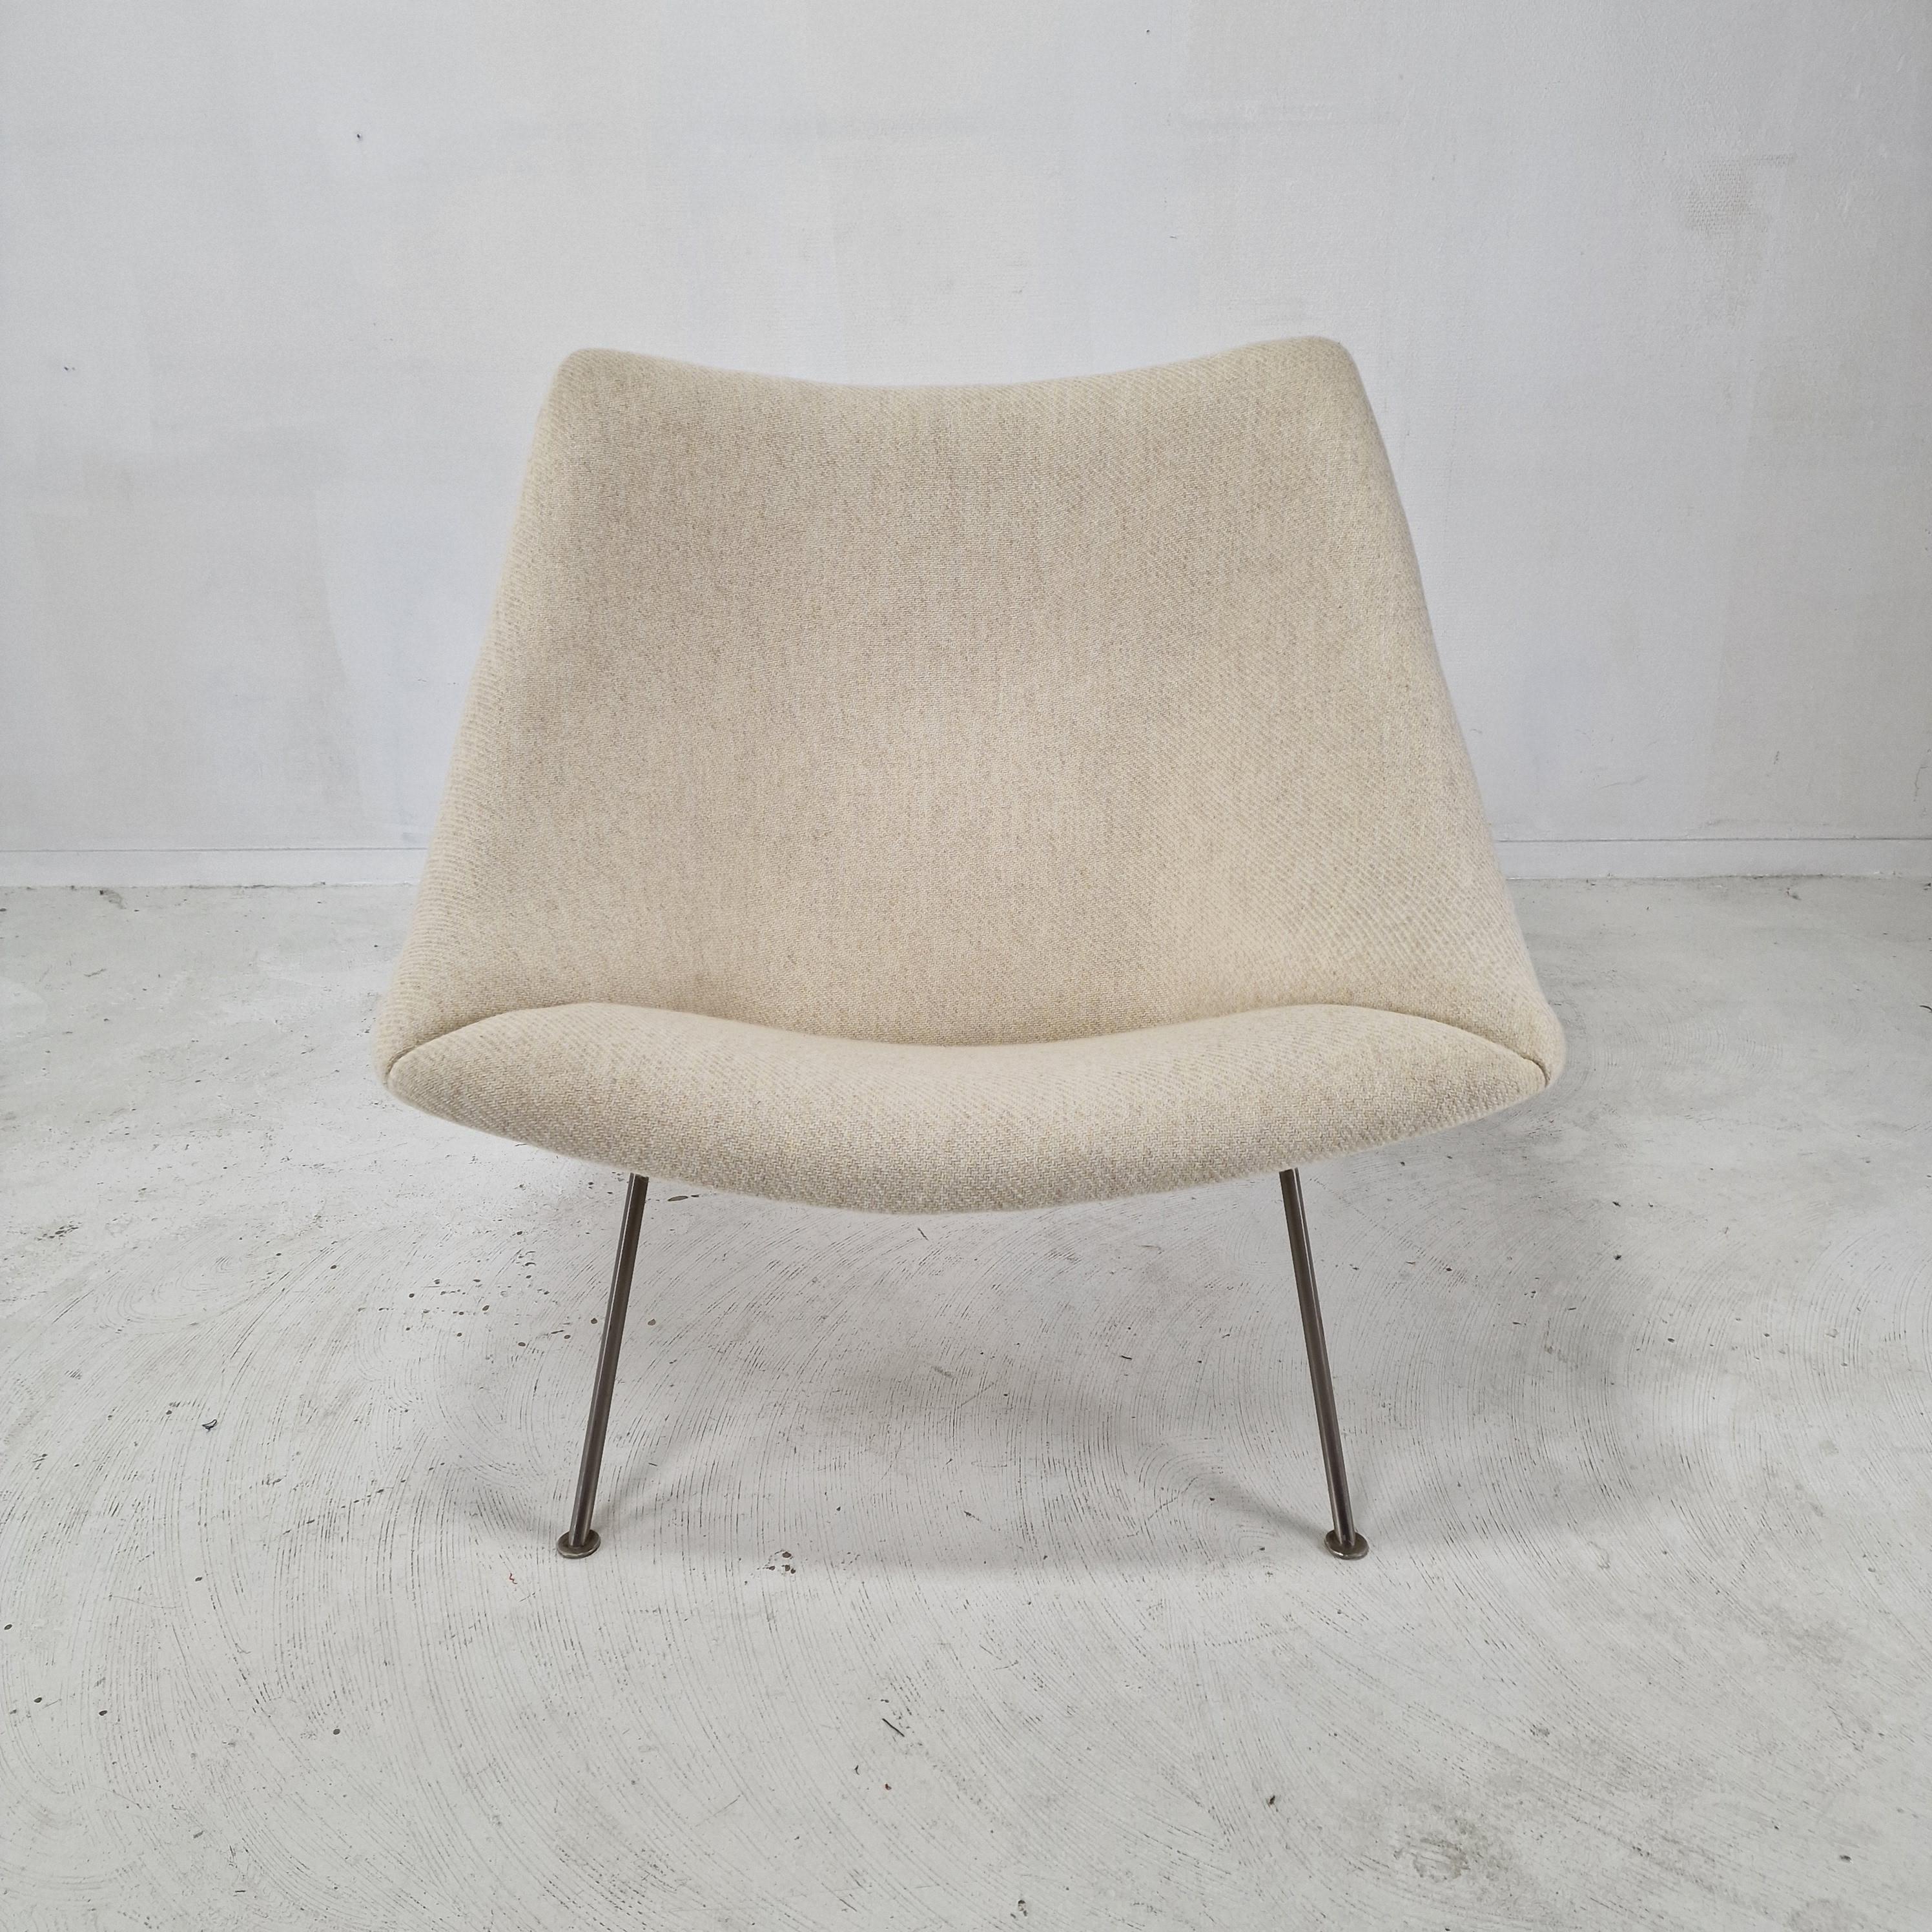 Woven Oyster Chair with Ottoman by Pierre Paulin for Artifort, 1960s